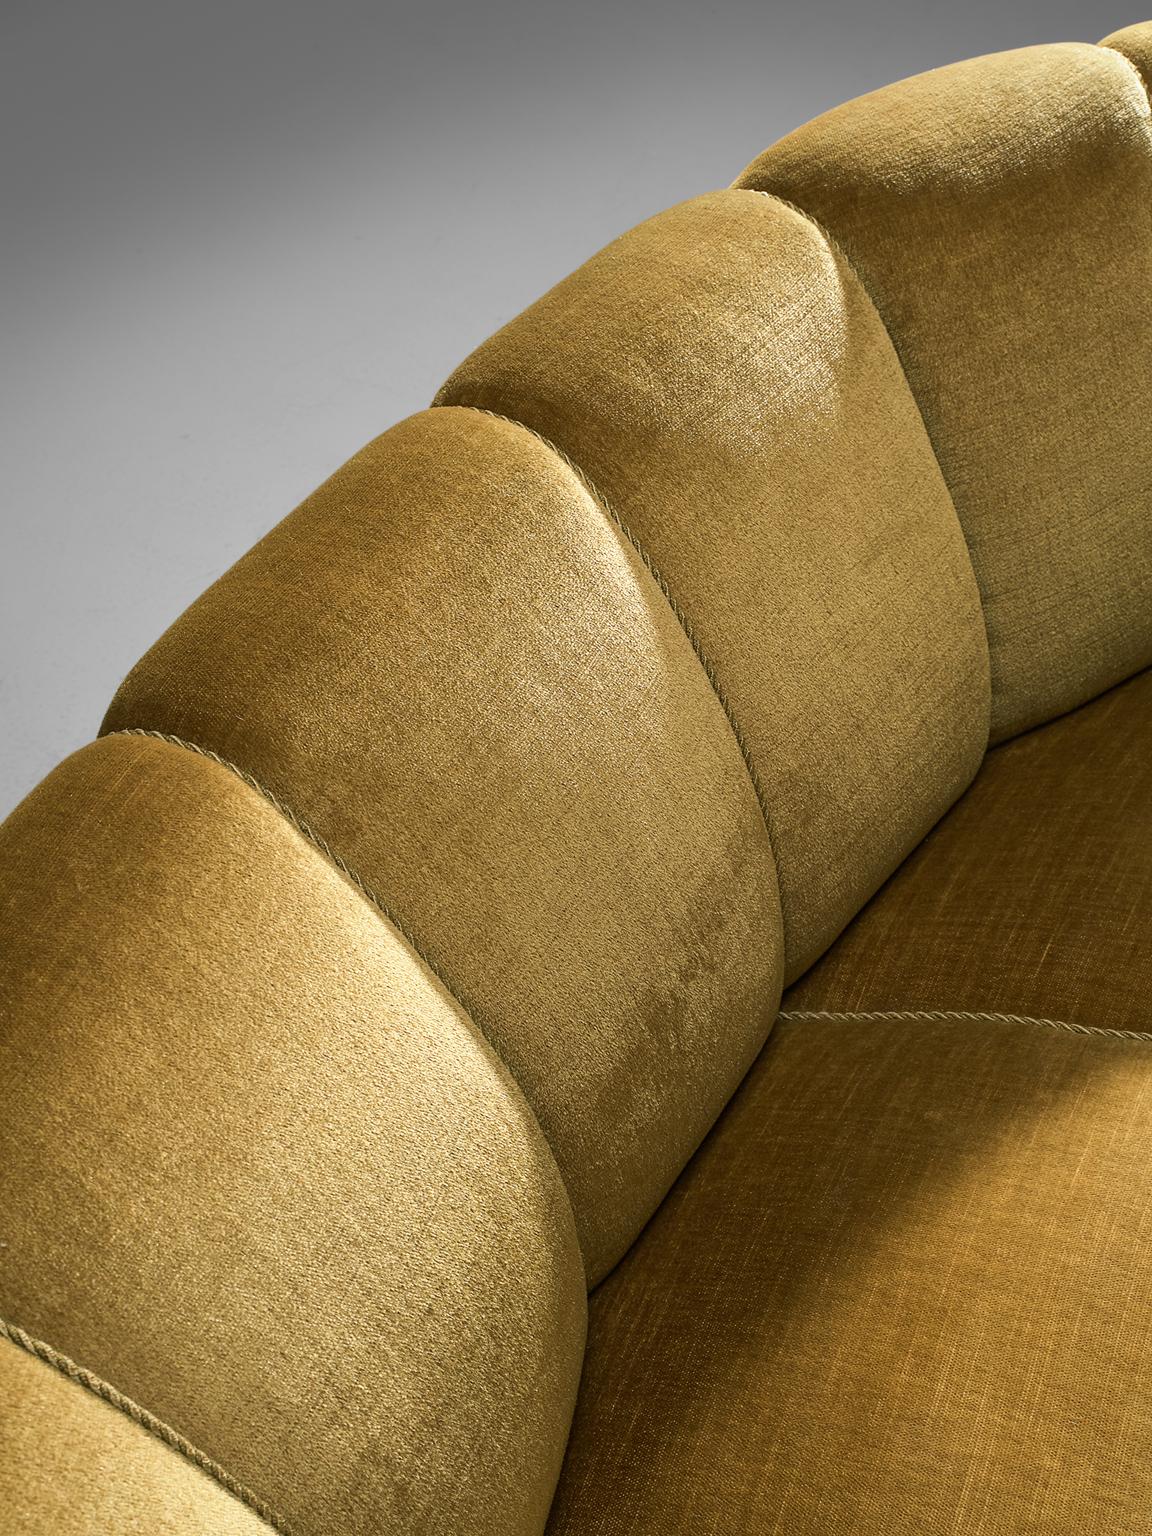 Mid-20th Century French Curved Sofa in Mustard Colored Velvet, 1950s